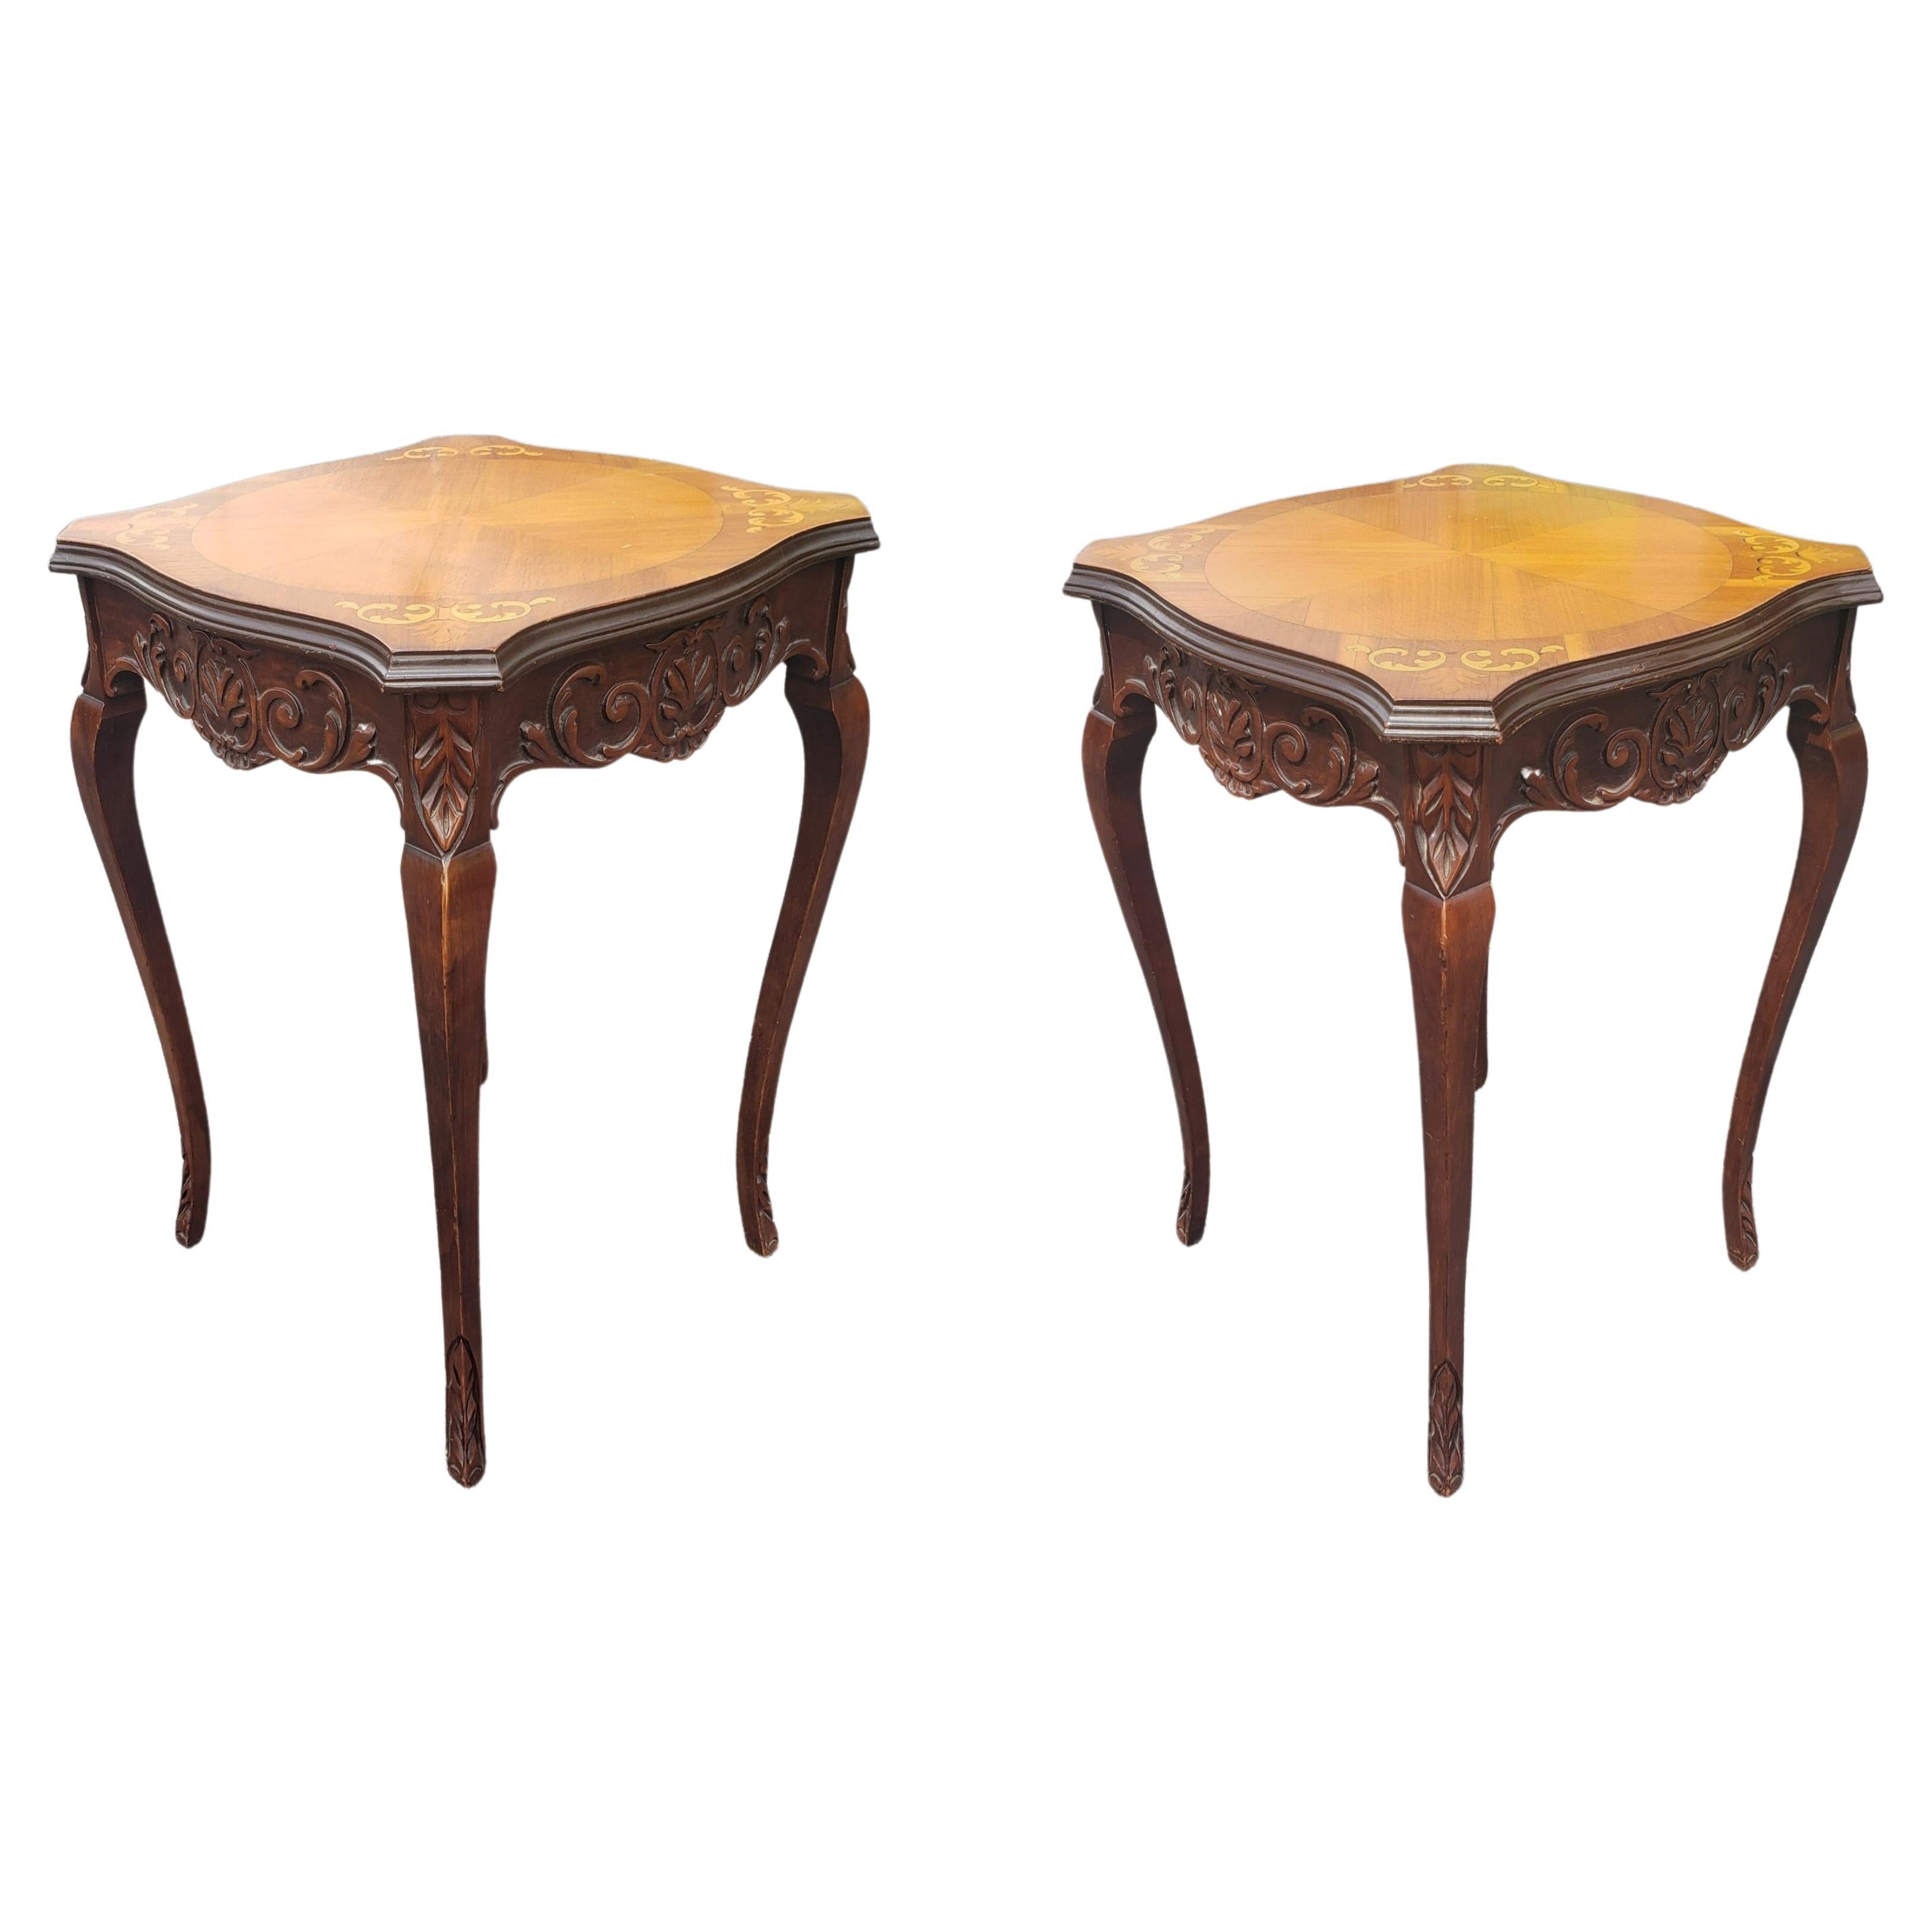 Pair of Mid-Century French Empire Style Carved Walnut and Marquetry Side Tables For Sale